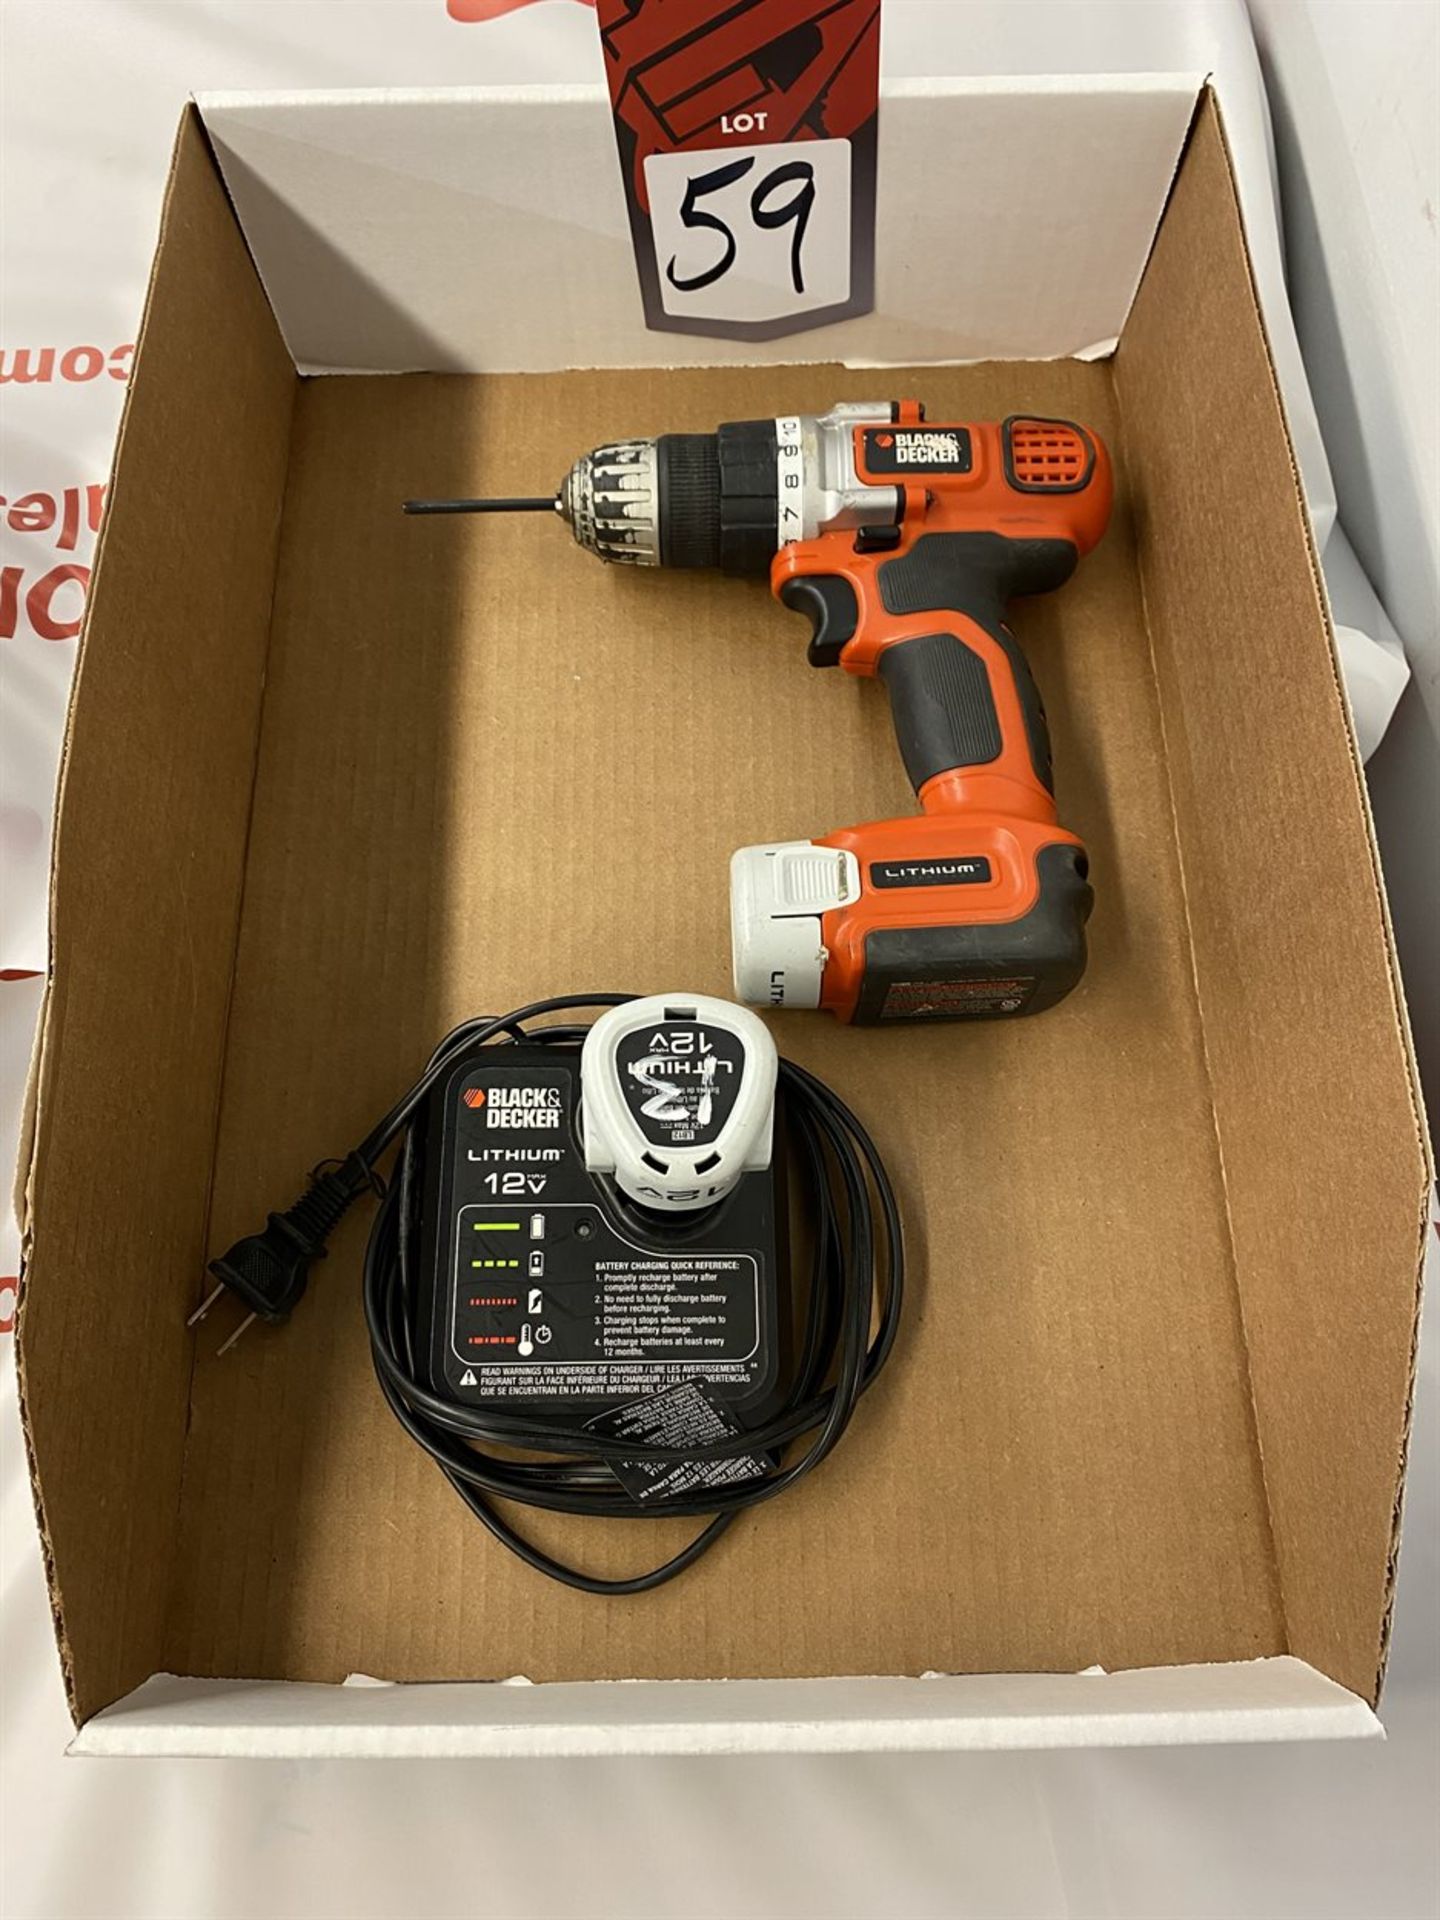 BLACK & DECKER 12V Cordless Drill w/ (2) Batteries and Charger